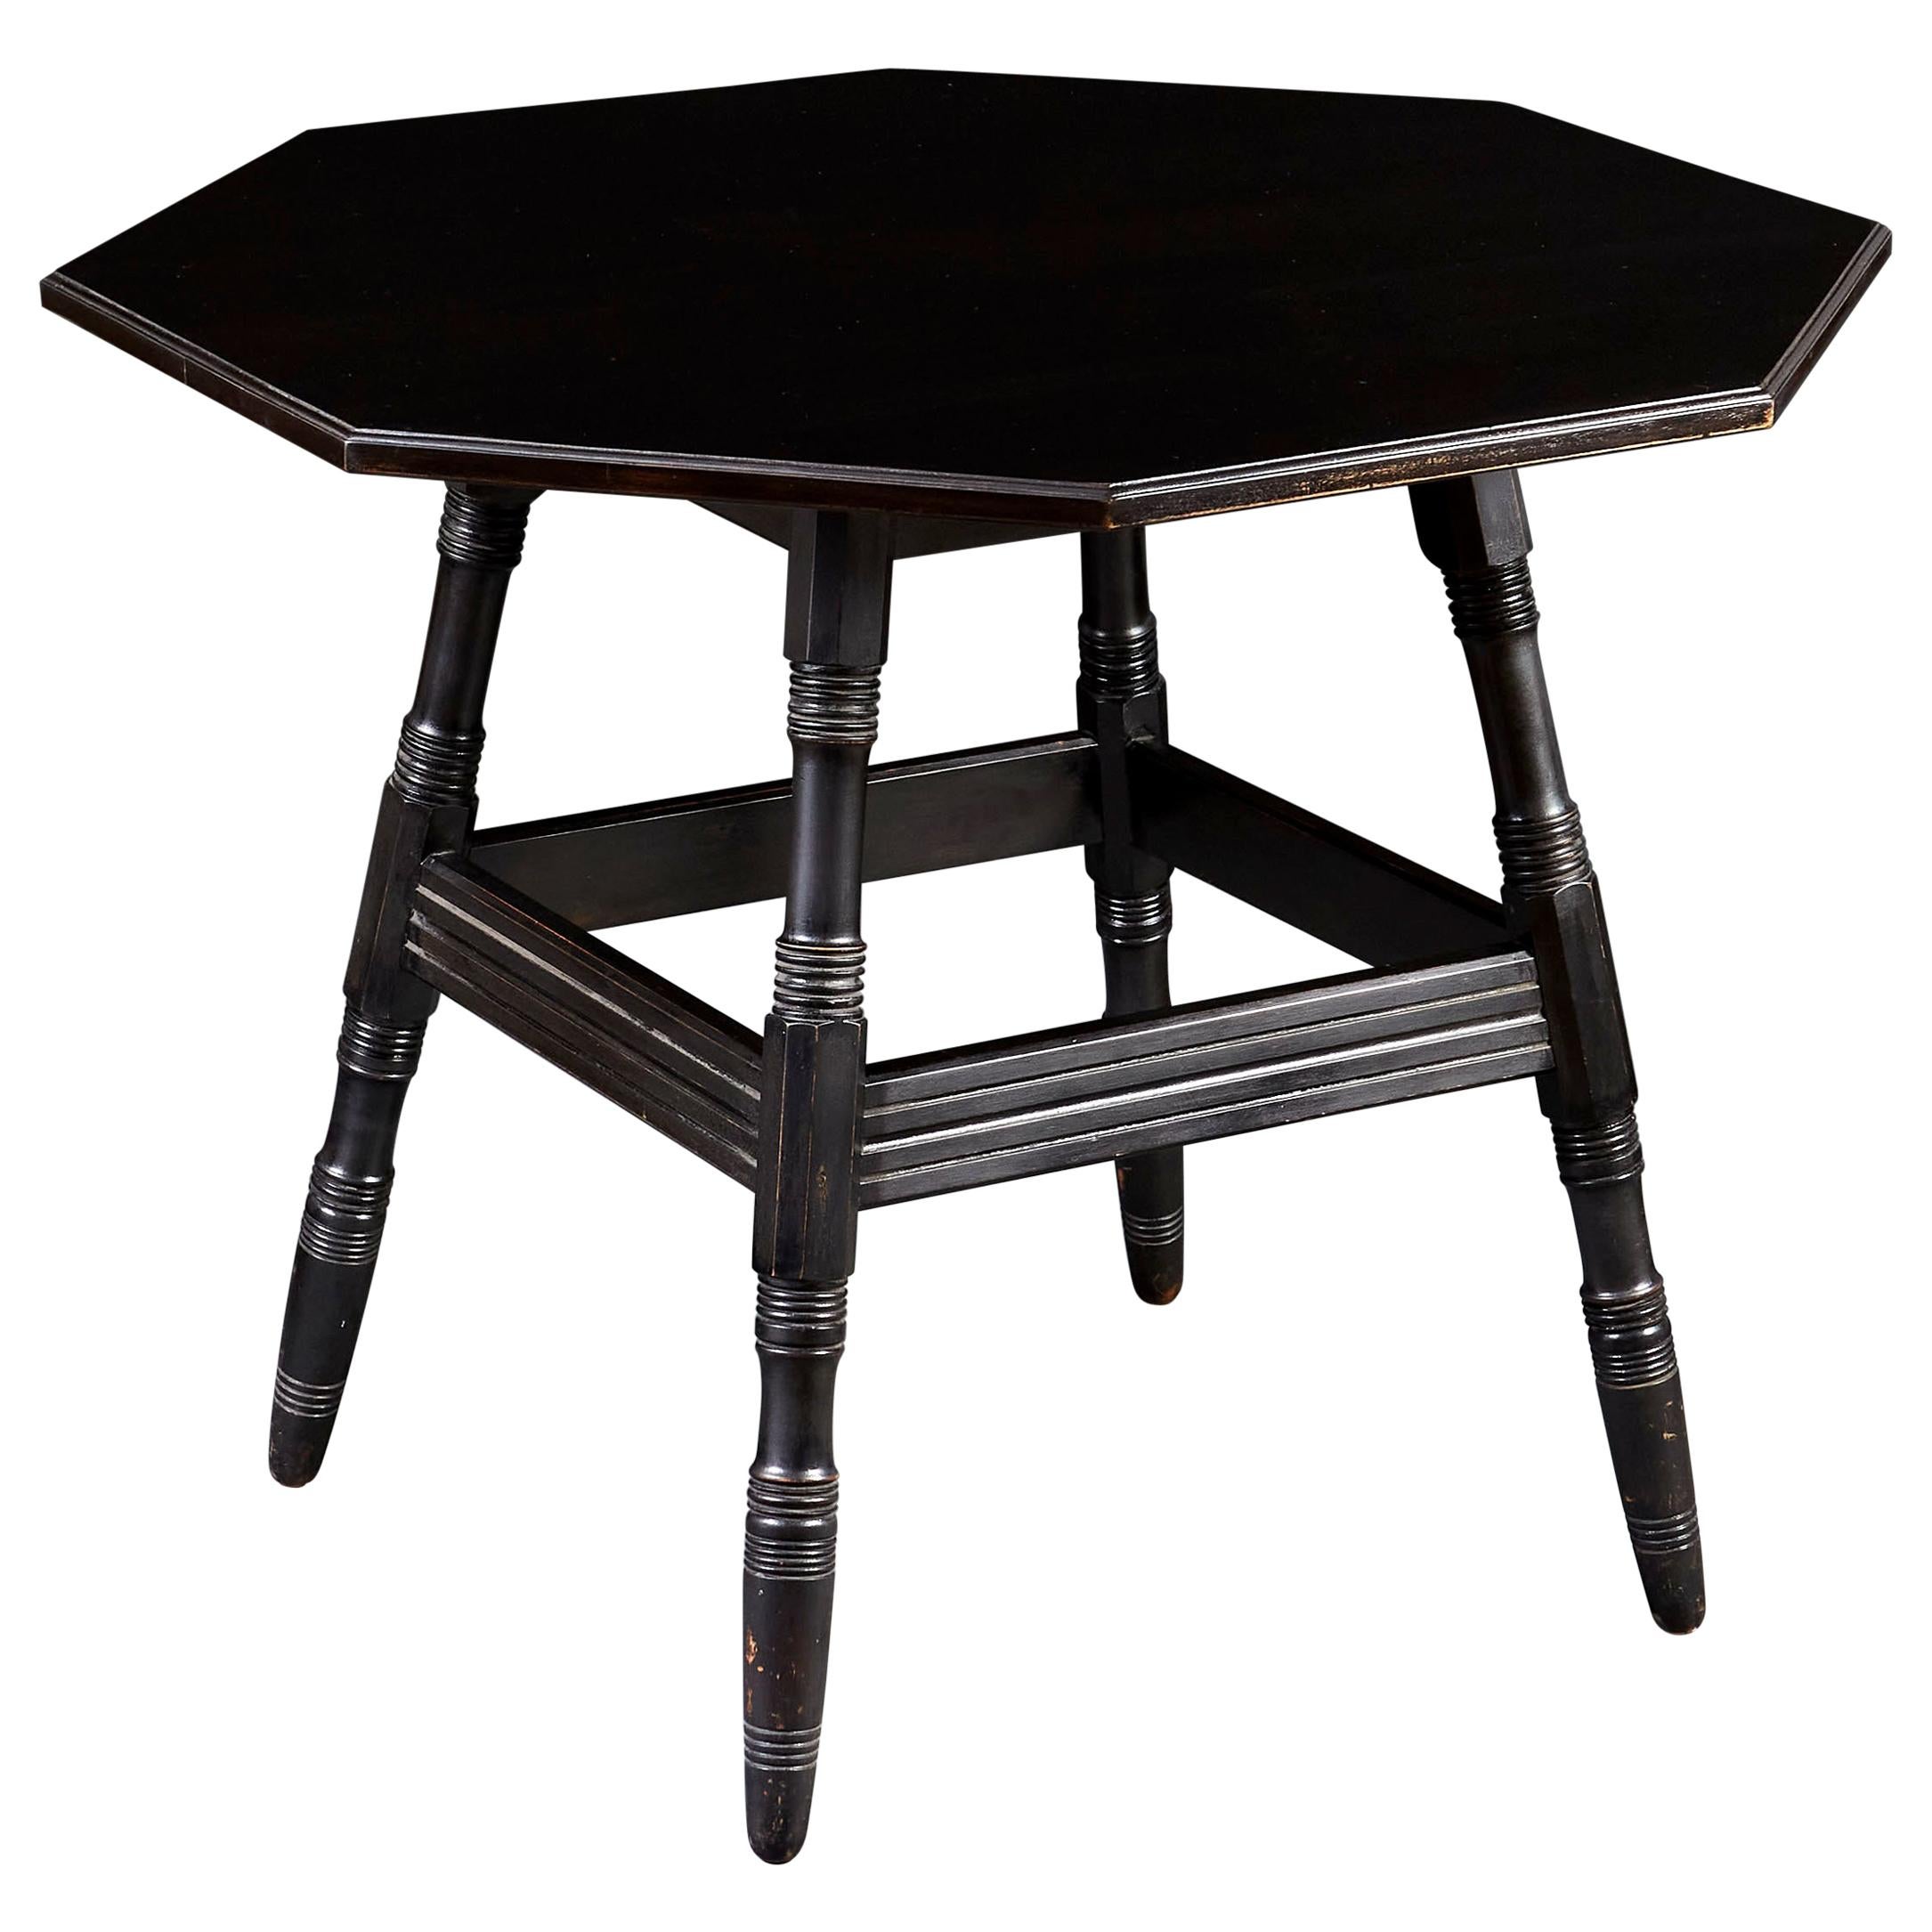 Ebonised Arts & Crafts Octagonal Centre Table in the Manner of Philip Webb